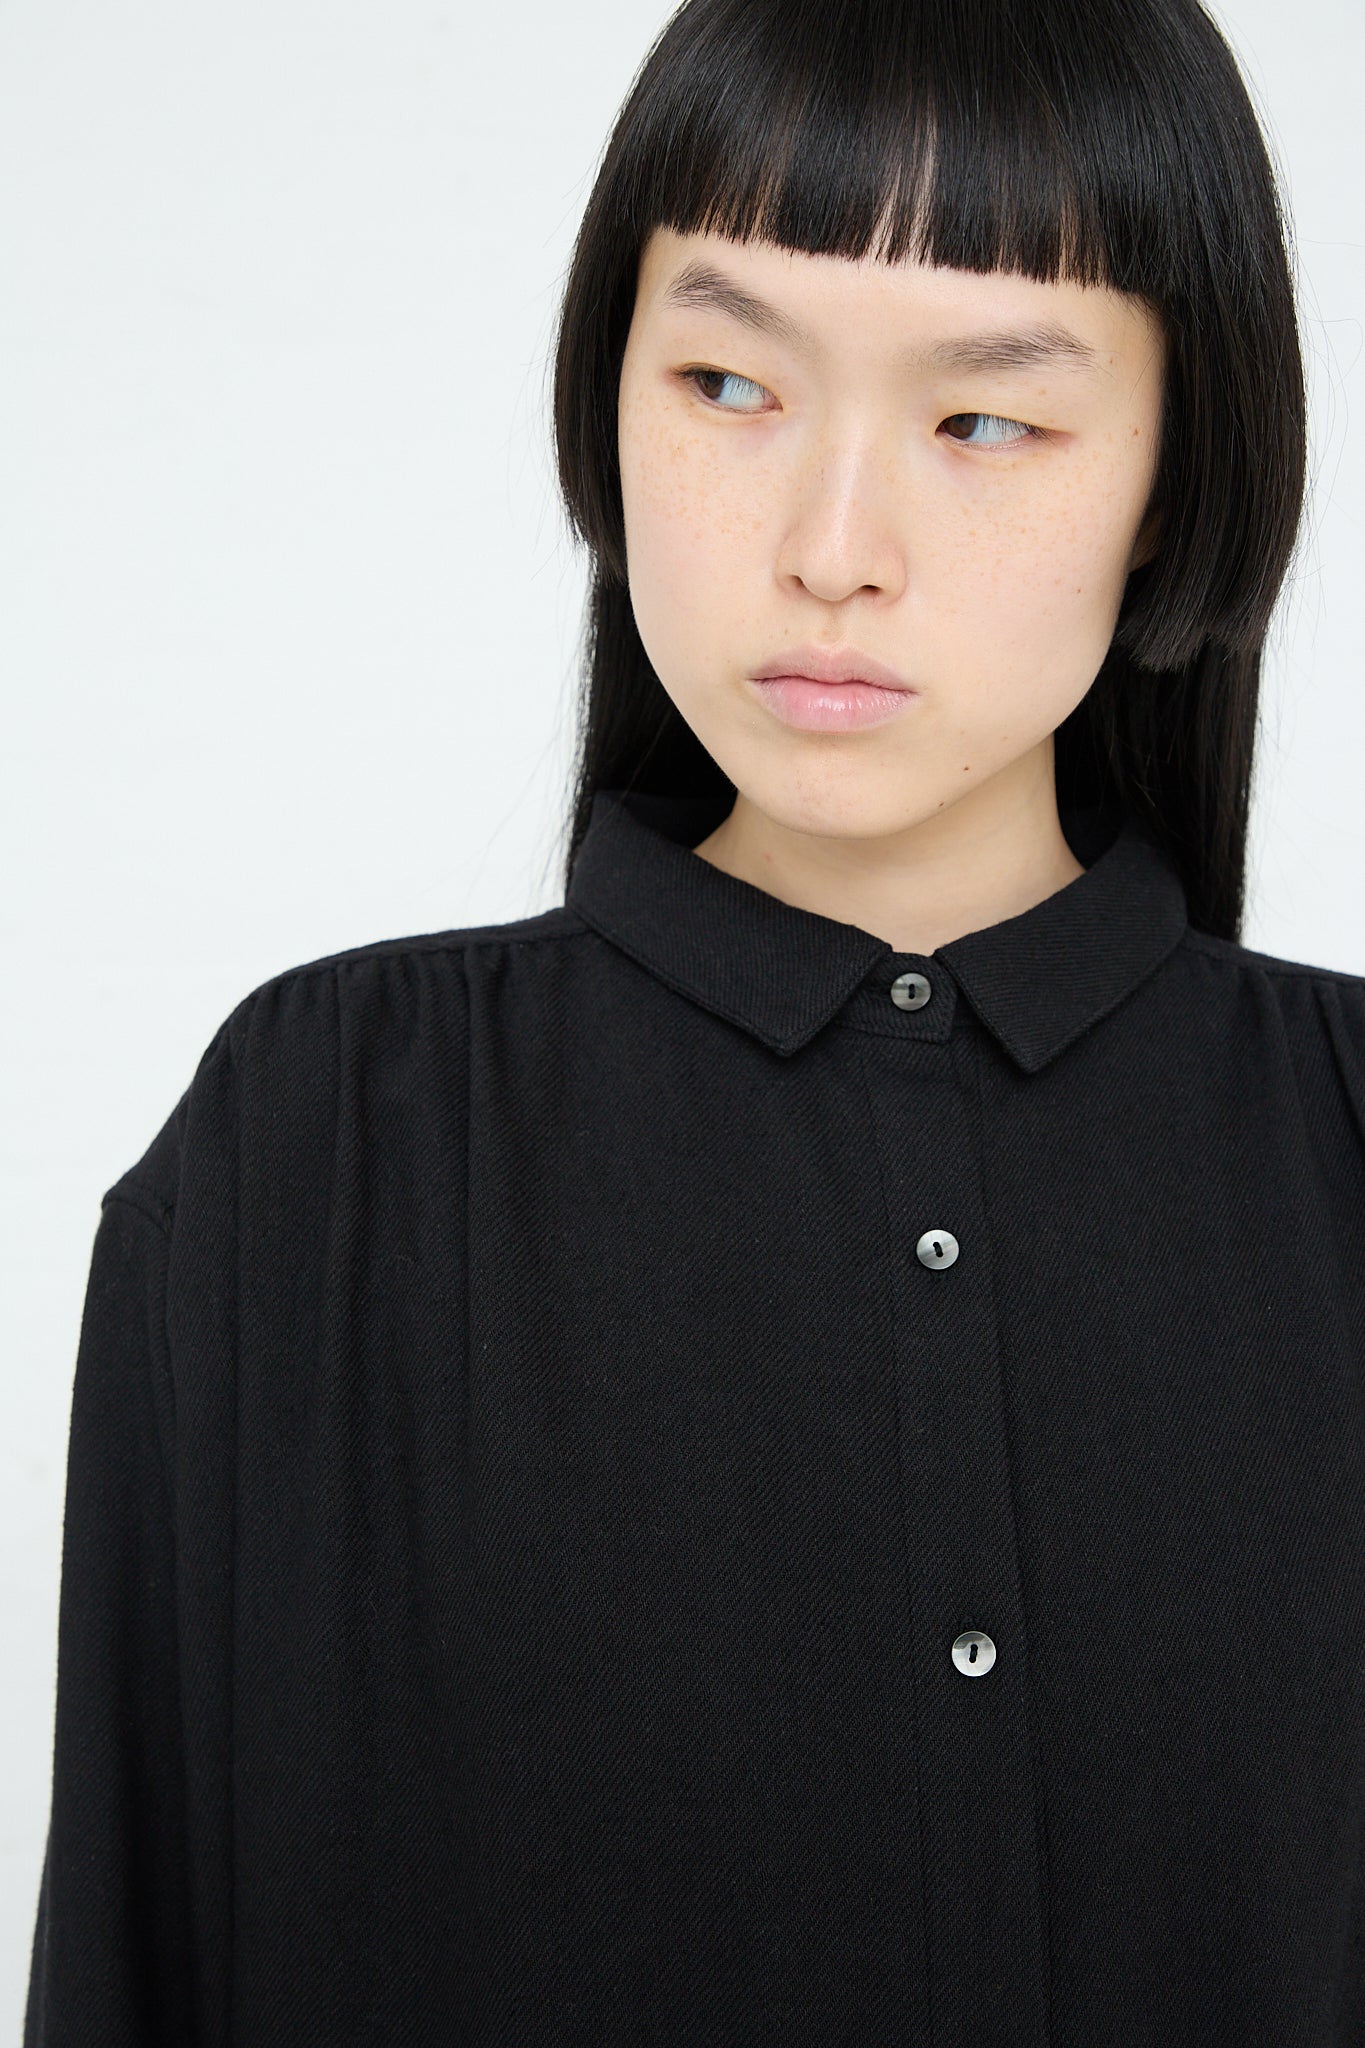 A model wearing an Ichi Woven Dress in Black made of natural fibers. Upclose.